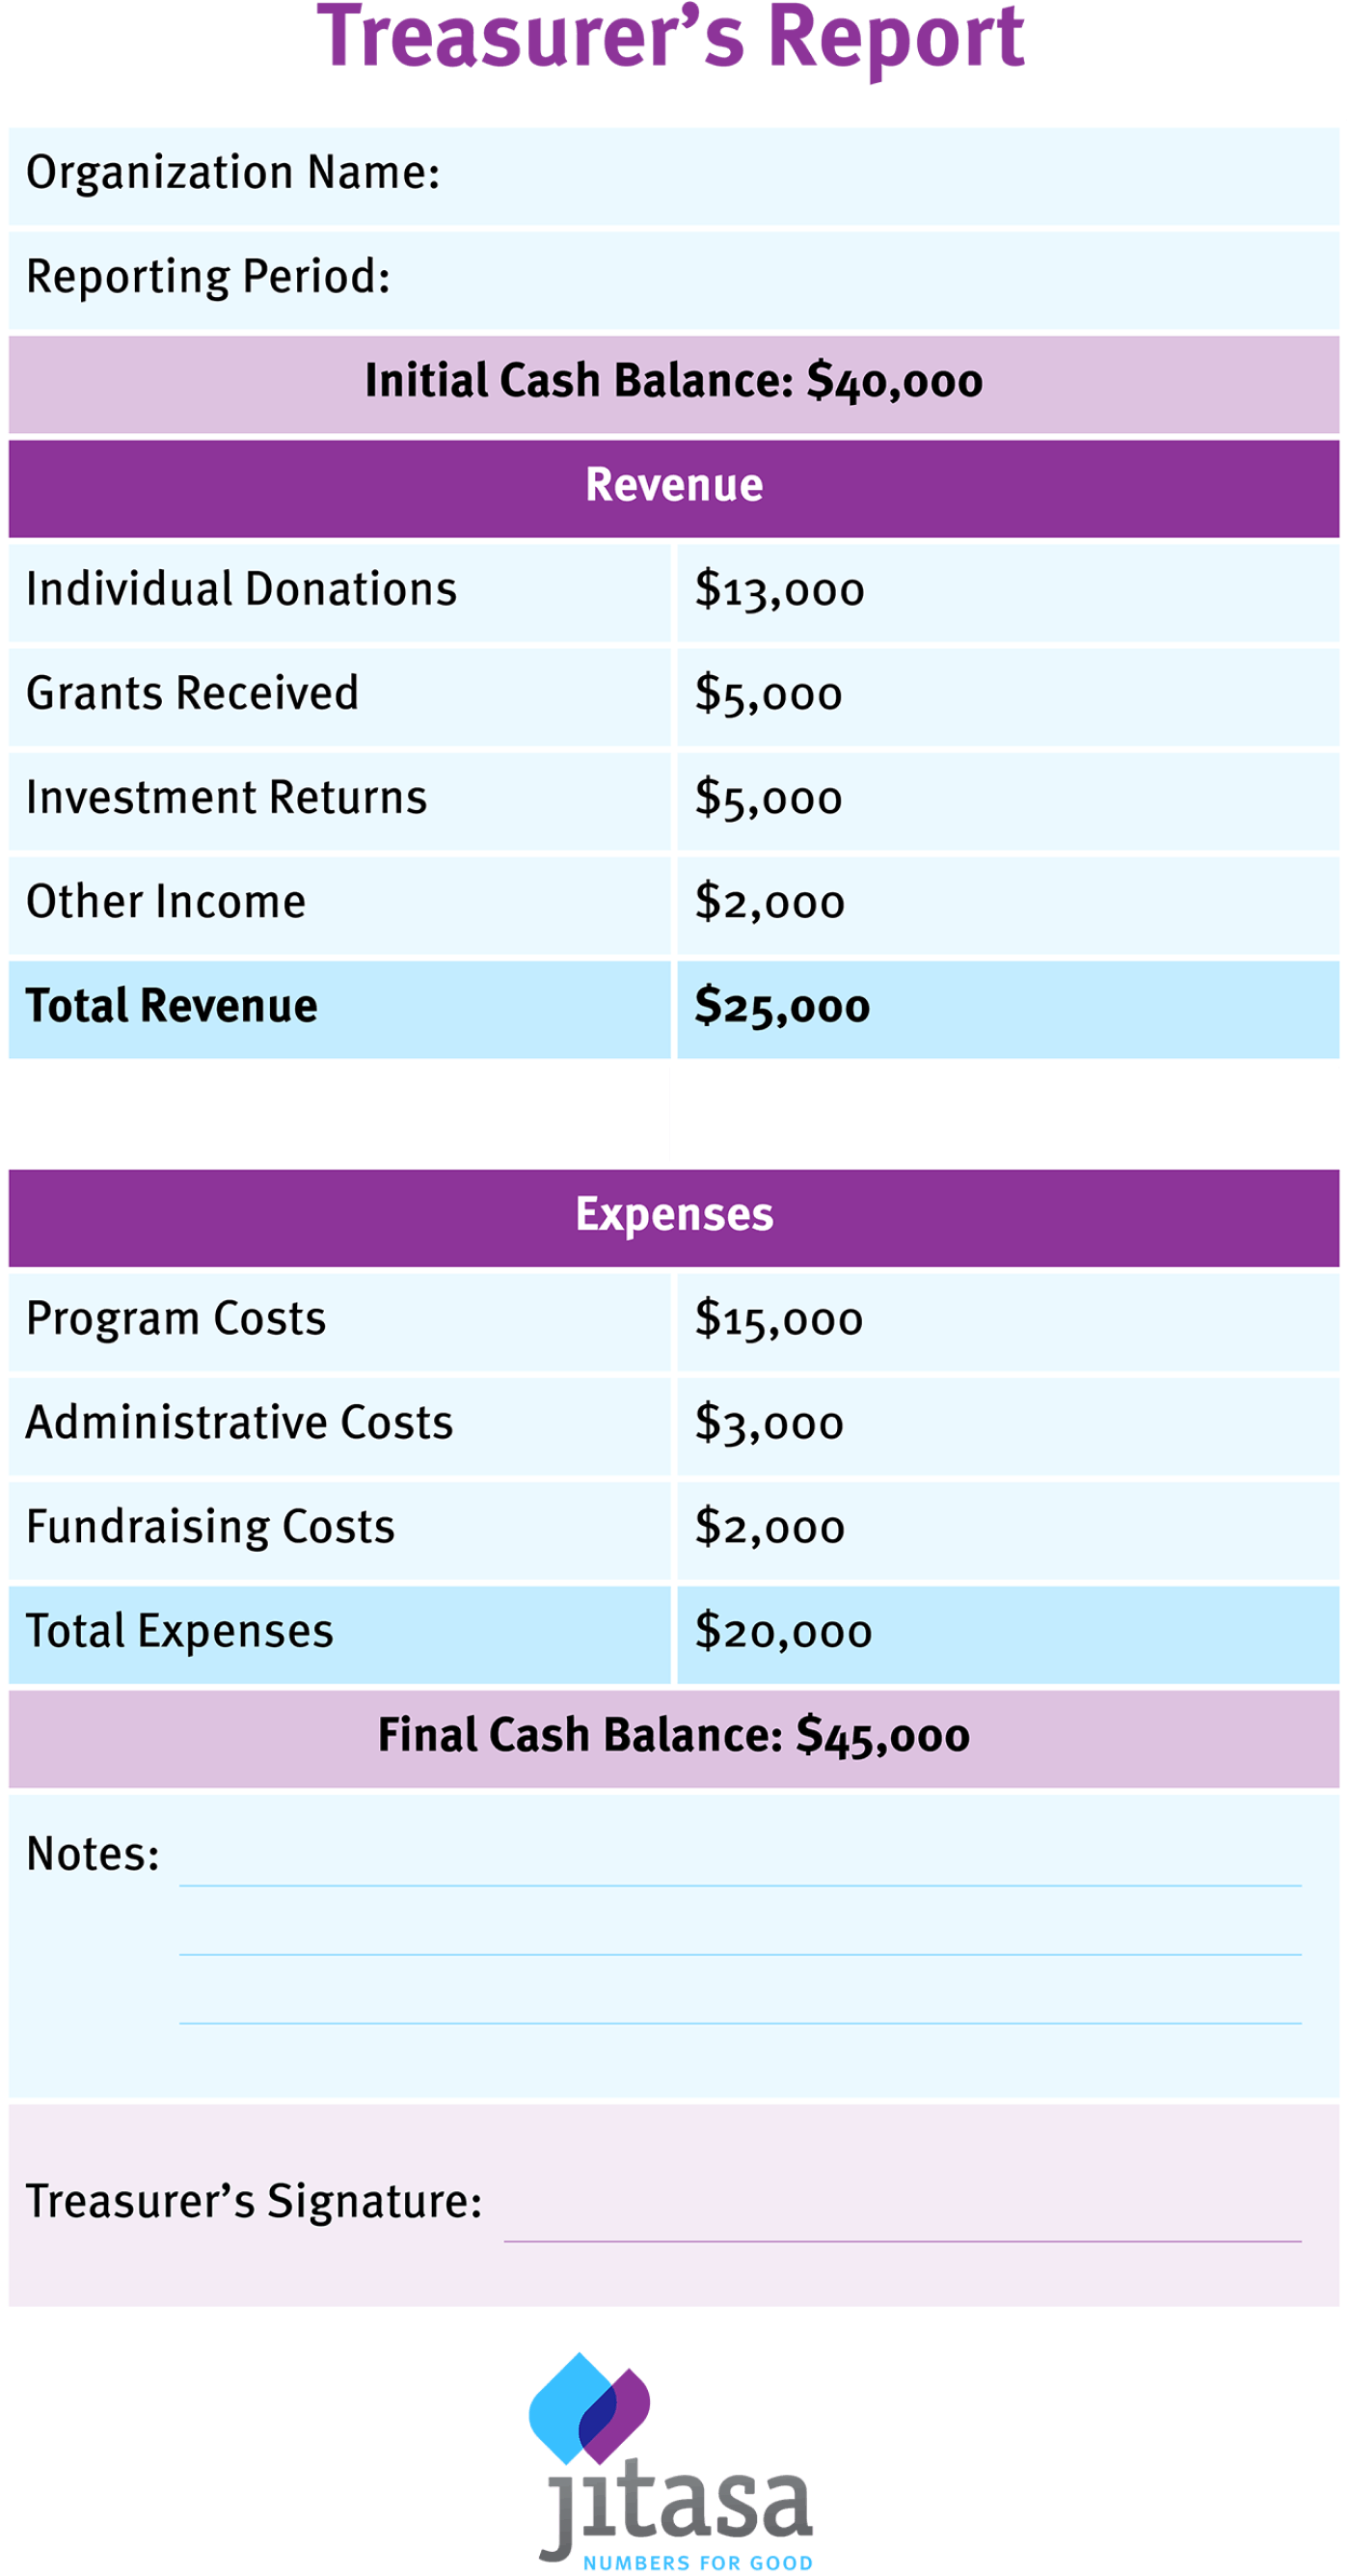 Example of a completed nonprofit treasurer report